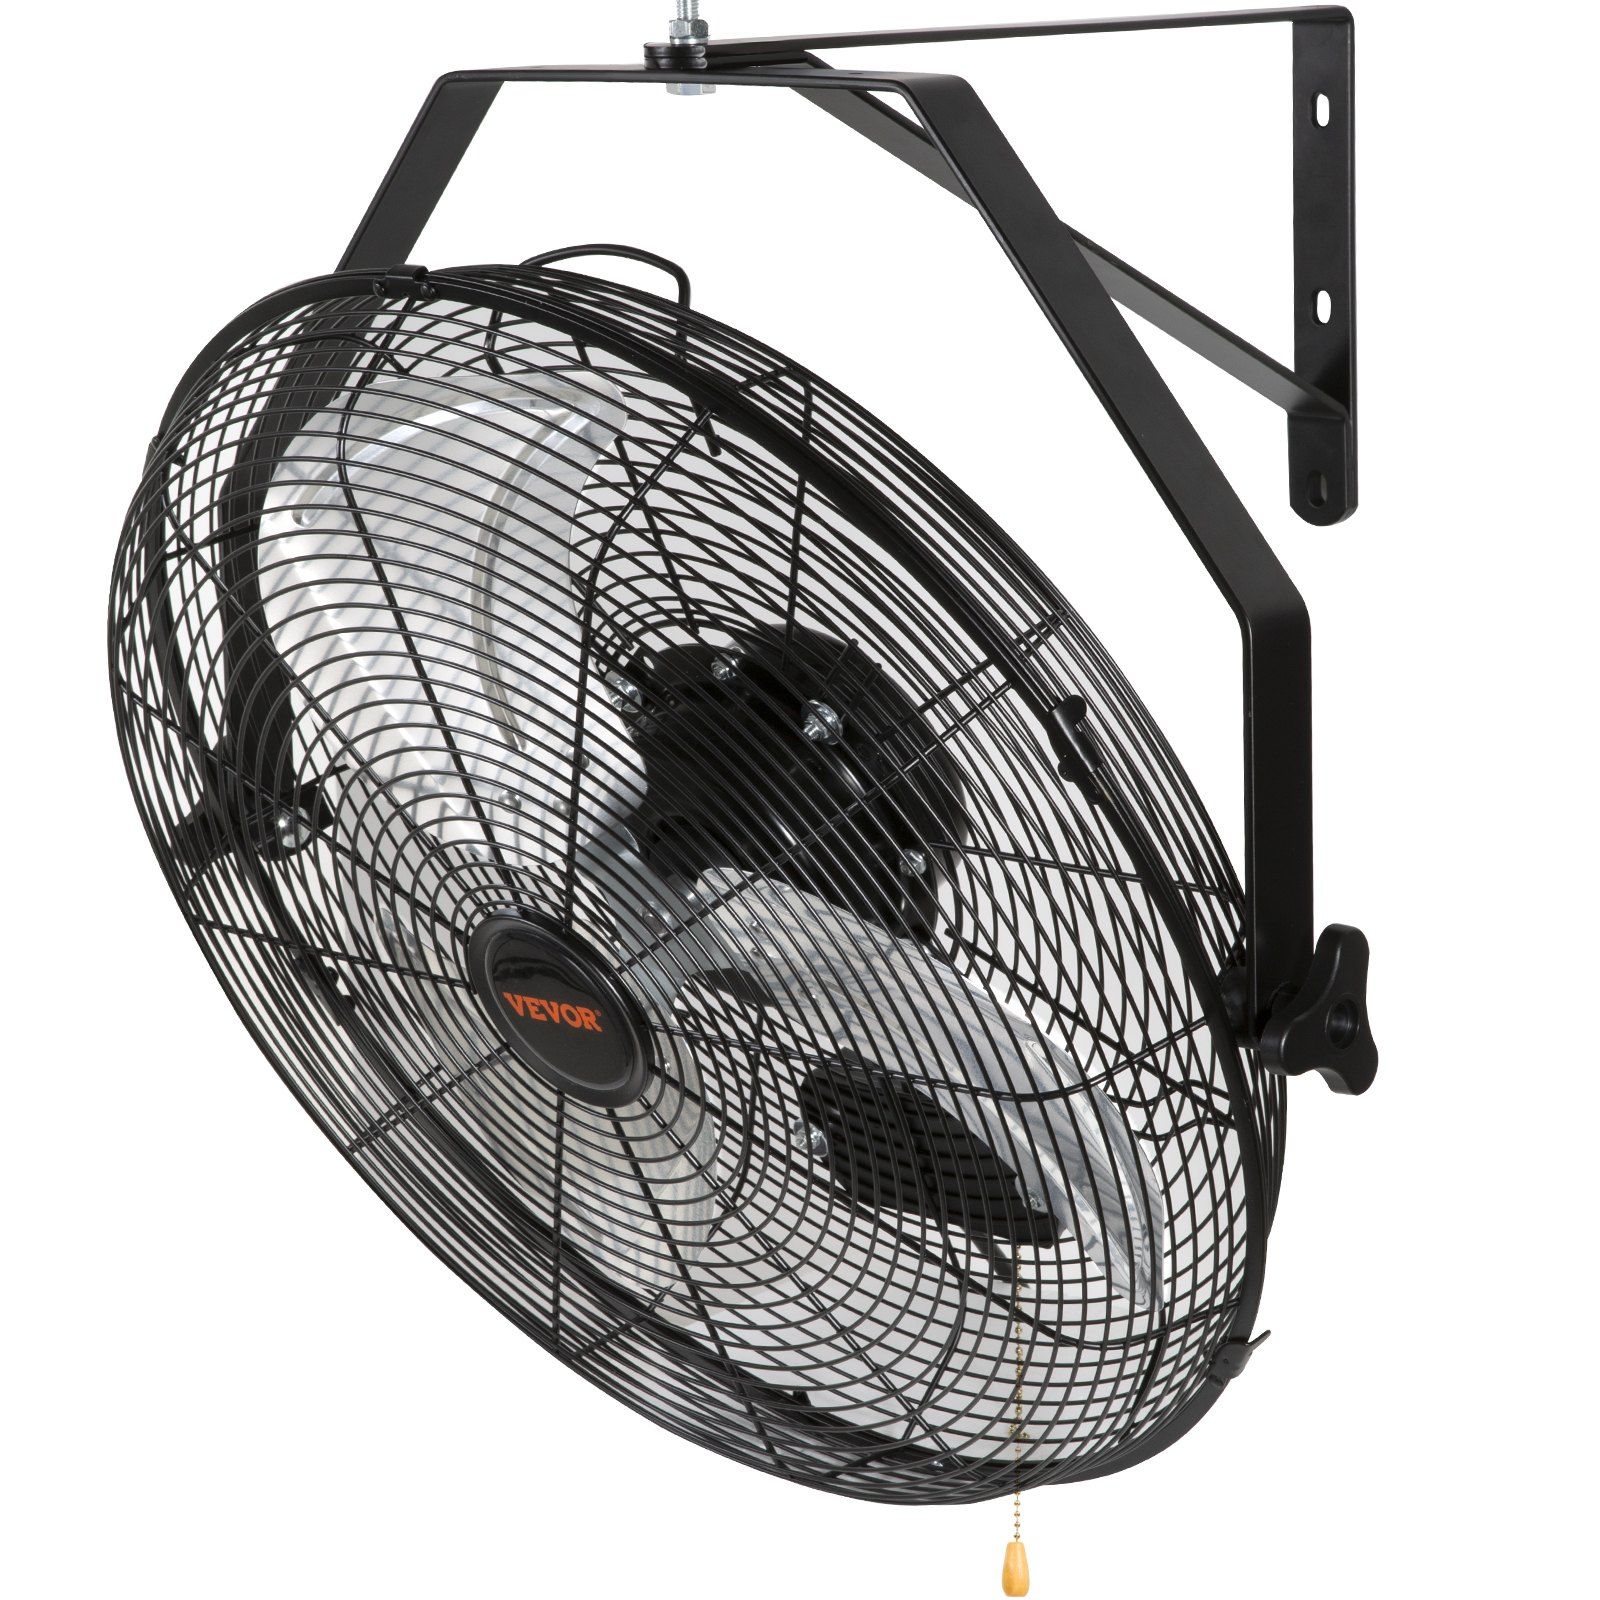 VEVOR Wall Mount Fan, 18 Inch, 3-speed High Velocity Max. 4150 CFM